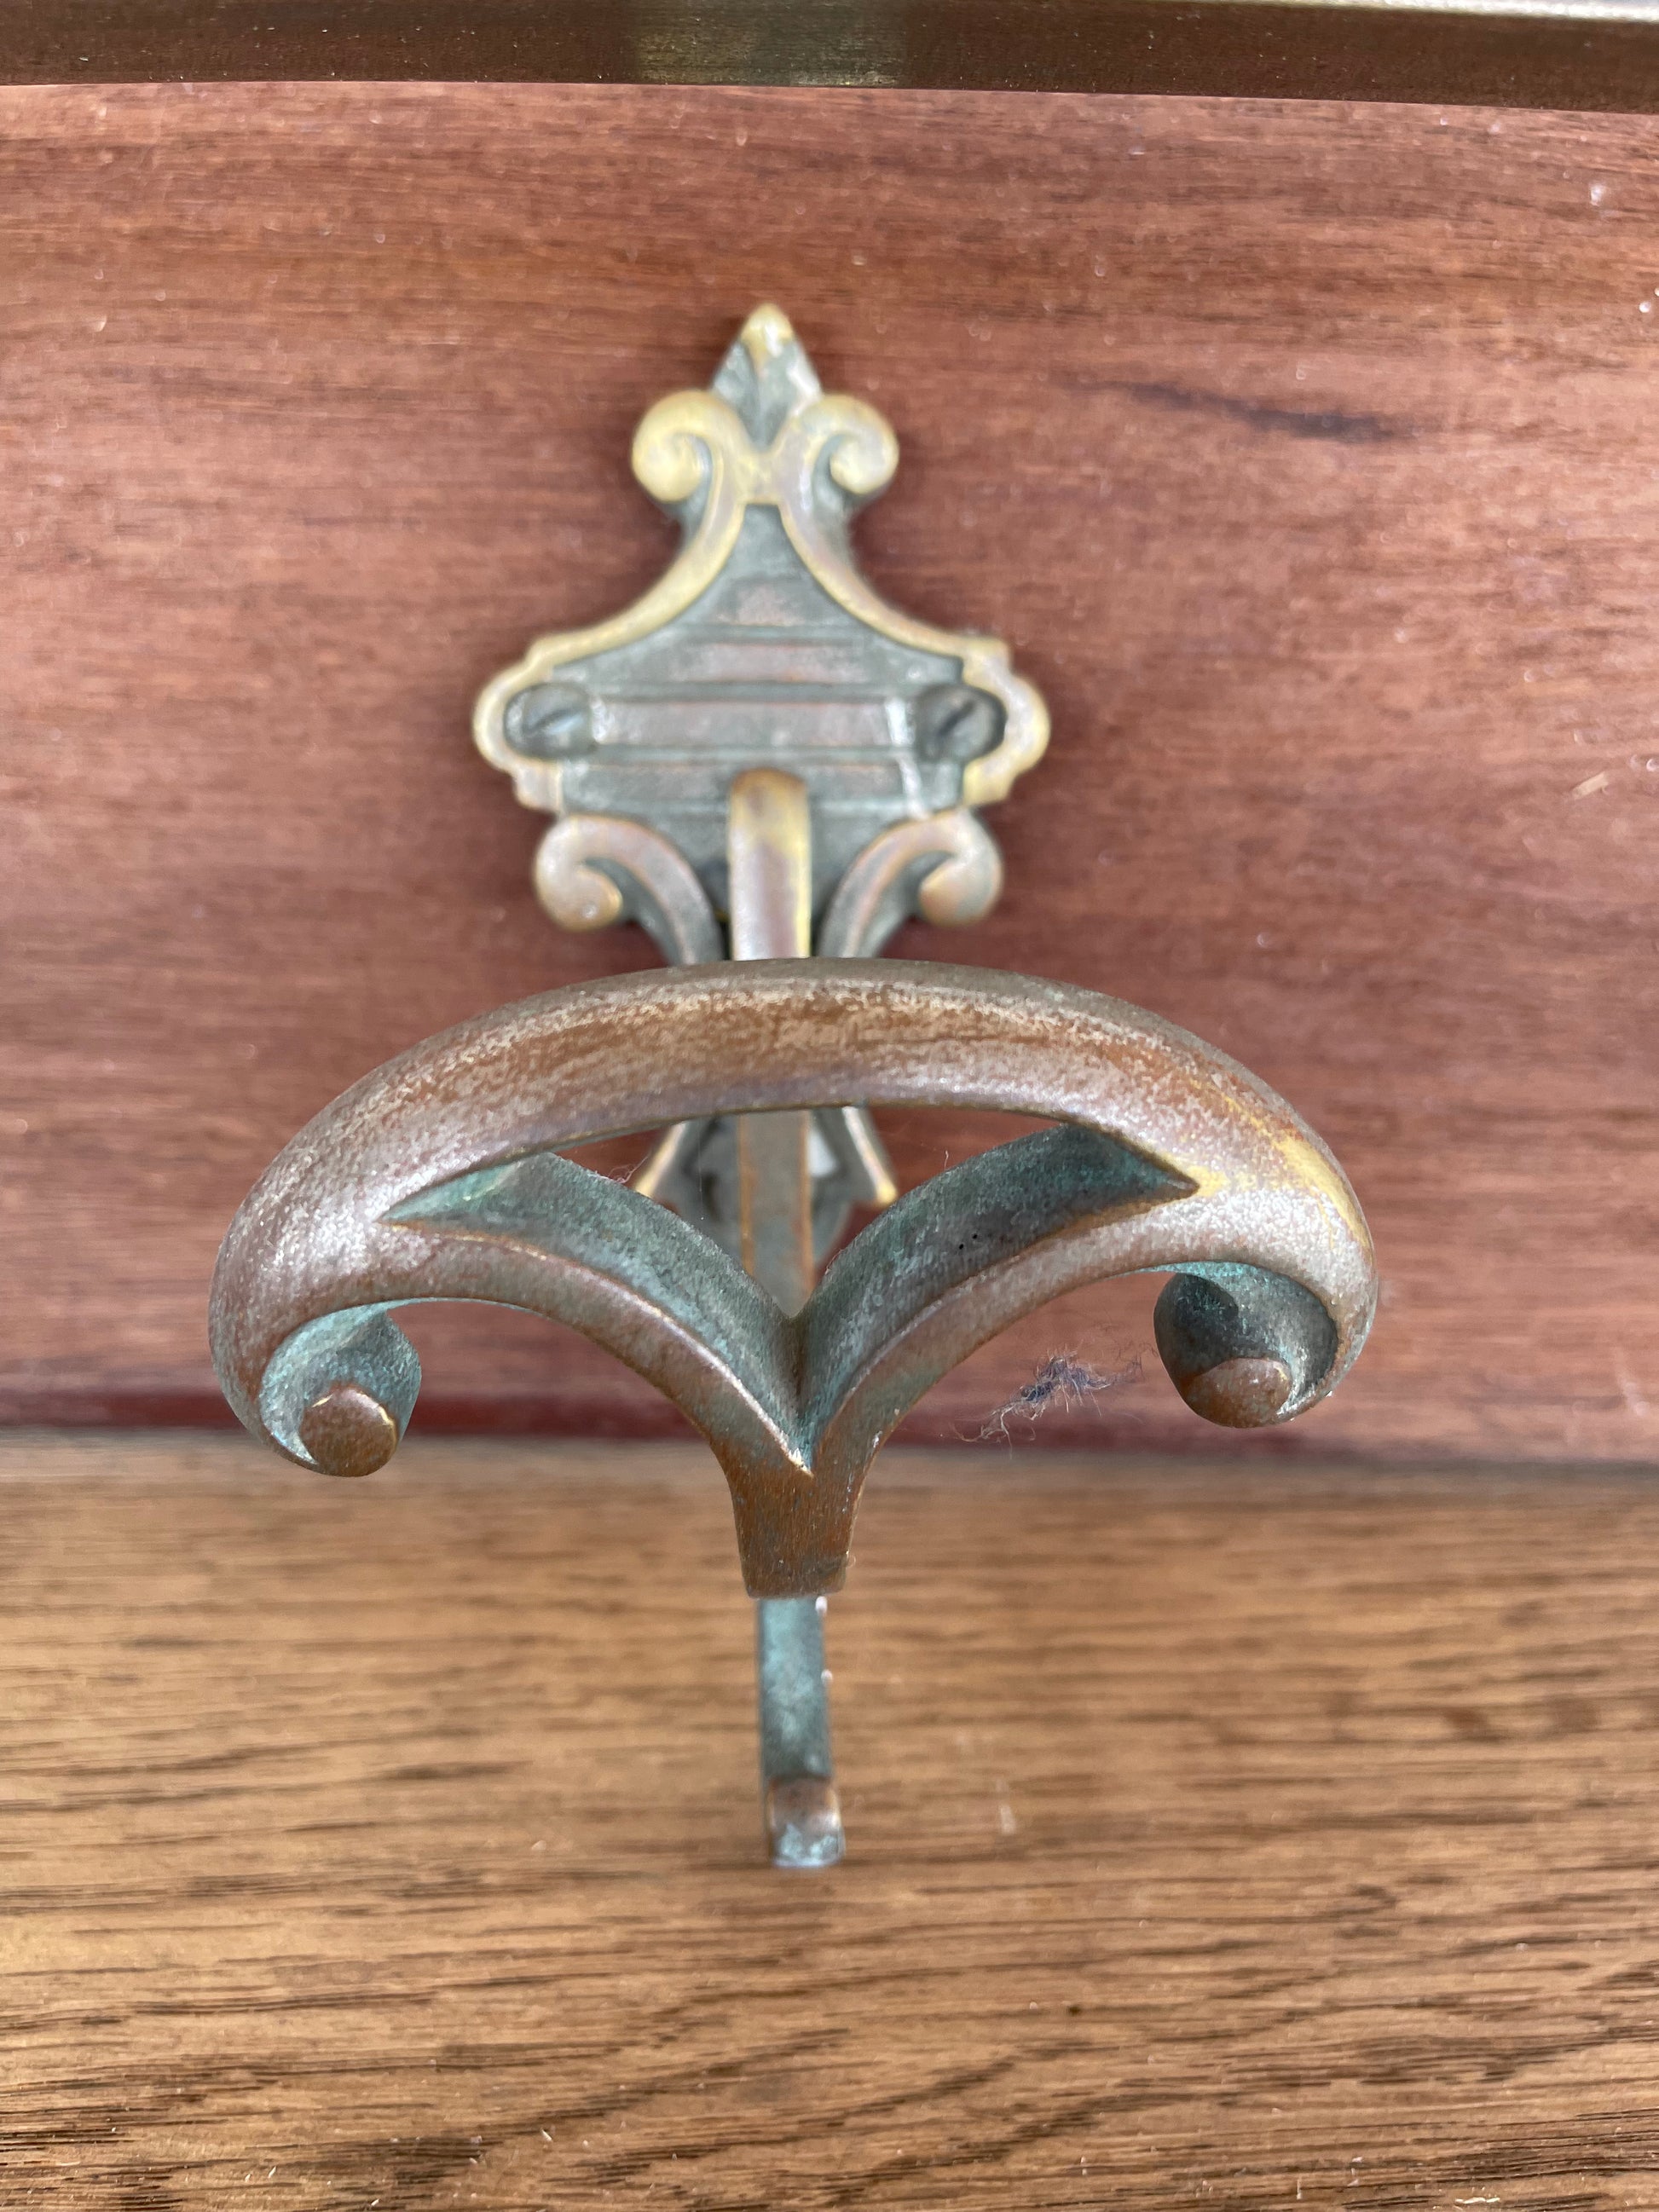 Wood and Brass Coat Rack 1900 - The White Barn Antiques